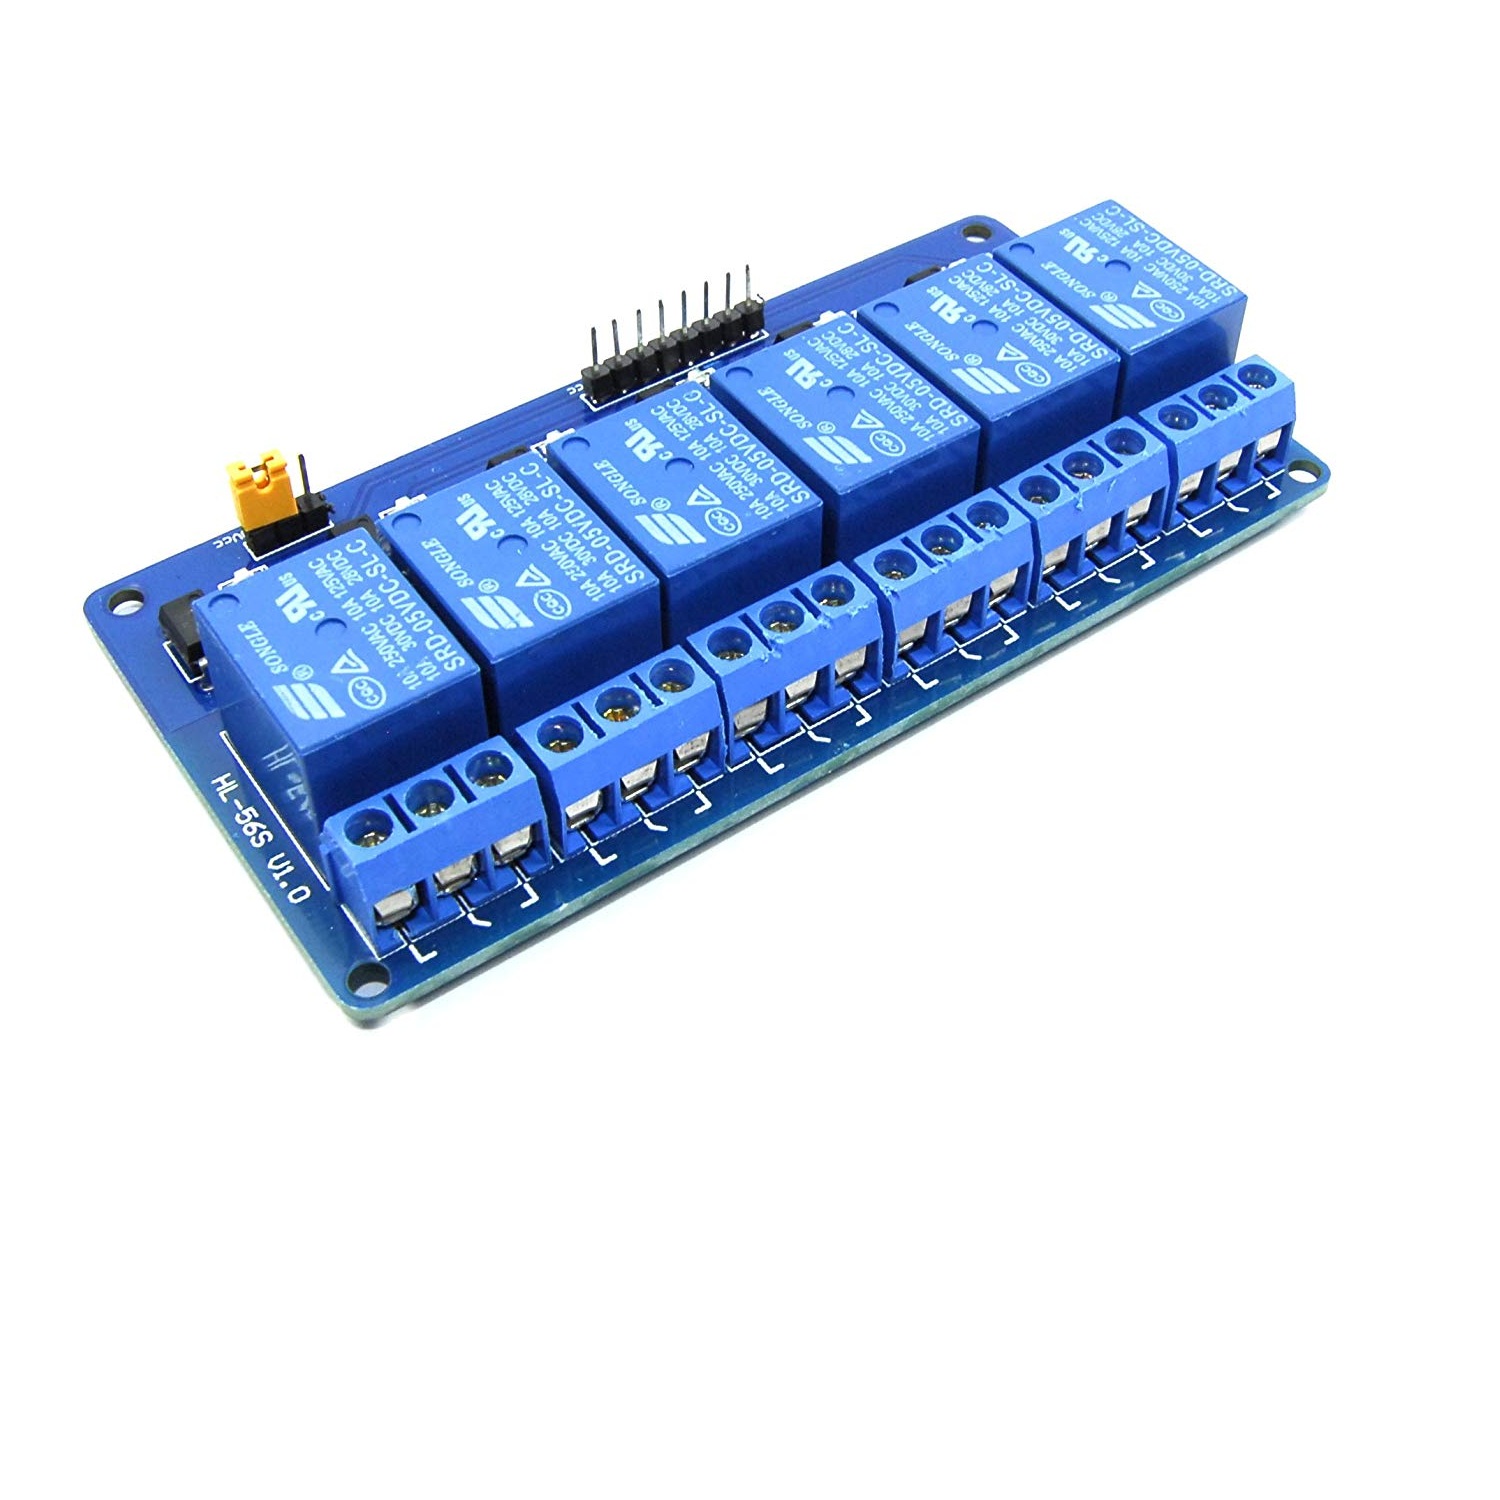 5V 6 Channel Low Level Relay Module with Light Coupling